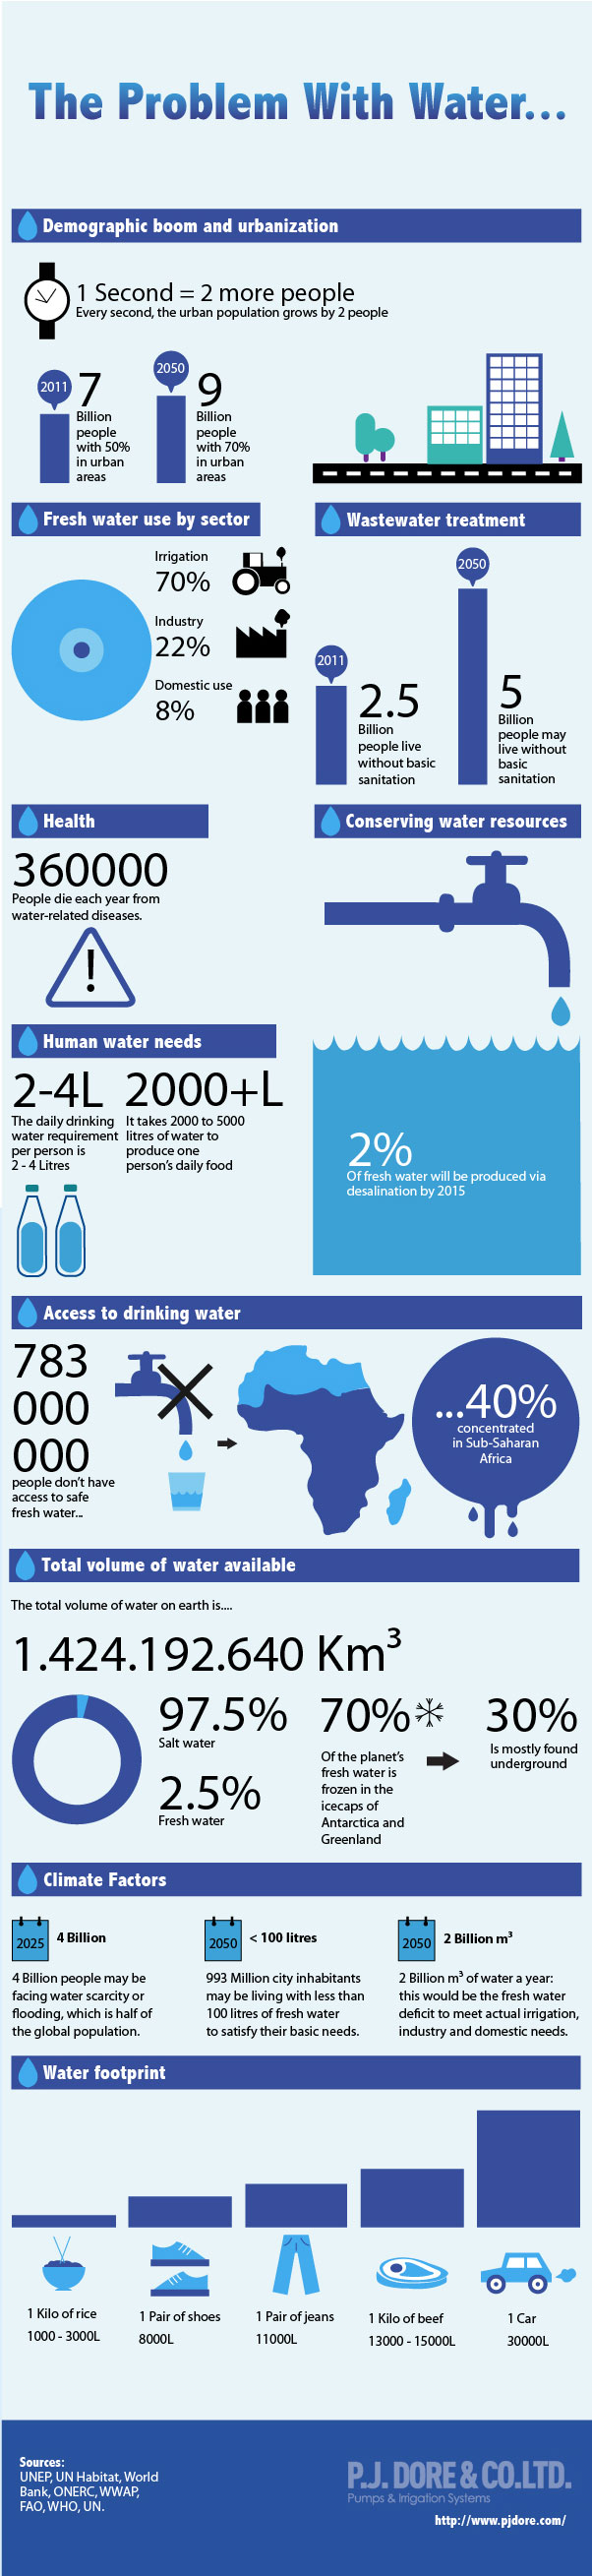 The Problem With Water Infographic